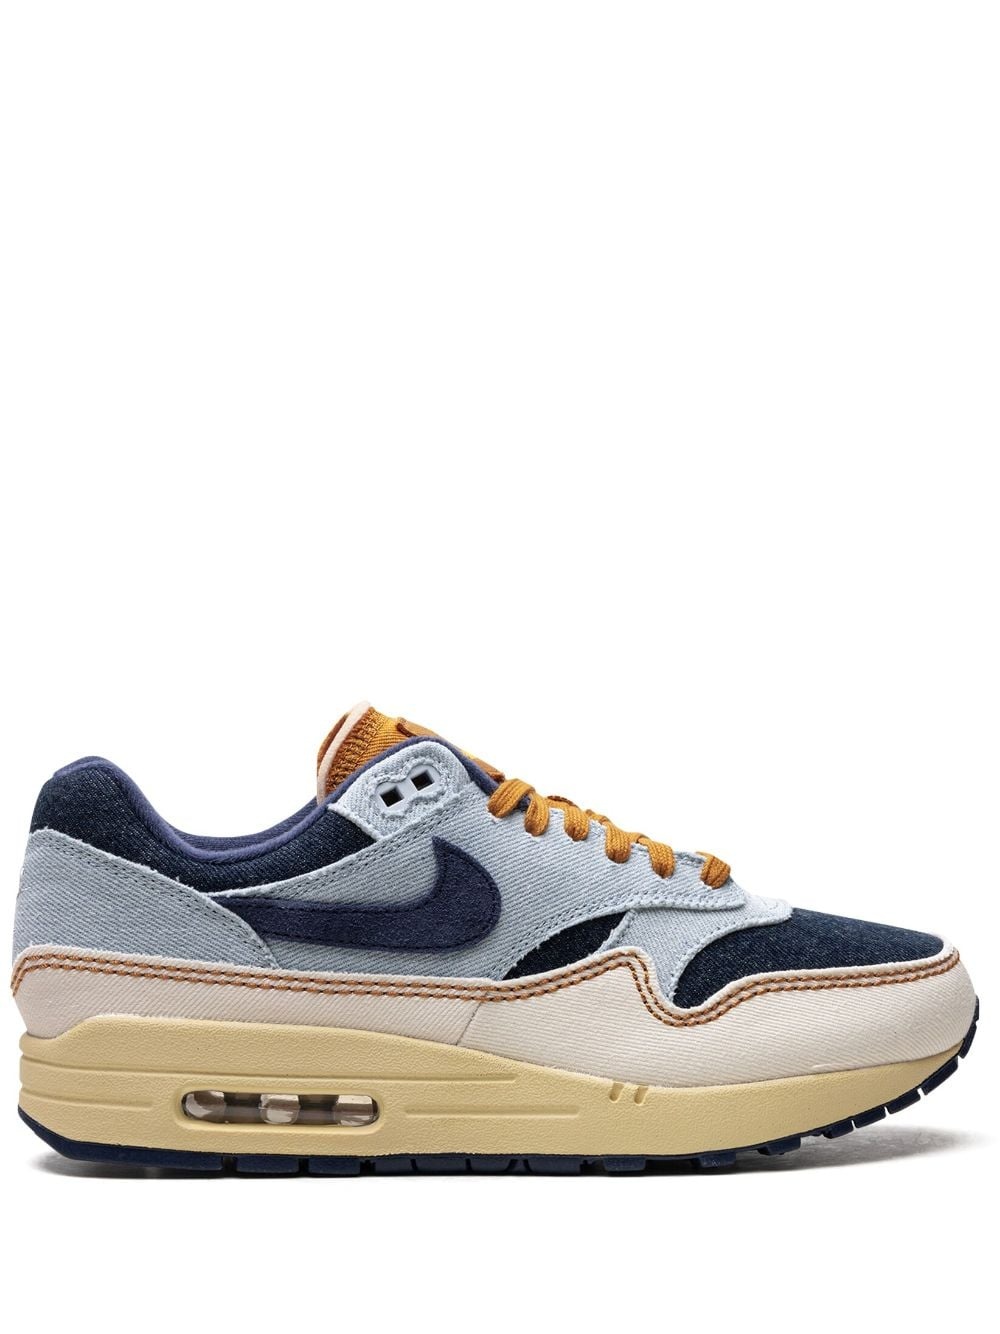 Air Max 1 '87 "Aura/Midnight Navy/Pale Ivory" sneakers - 1